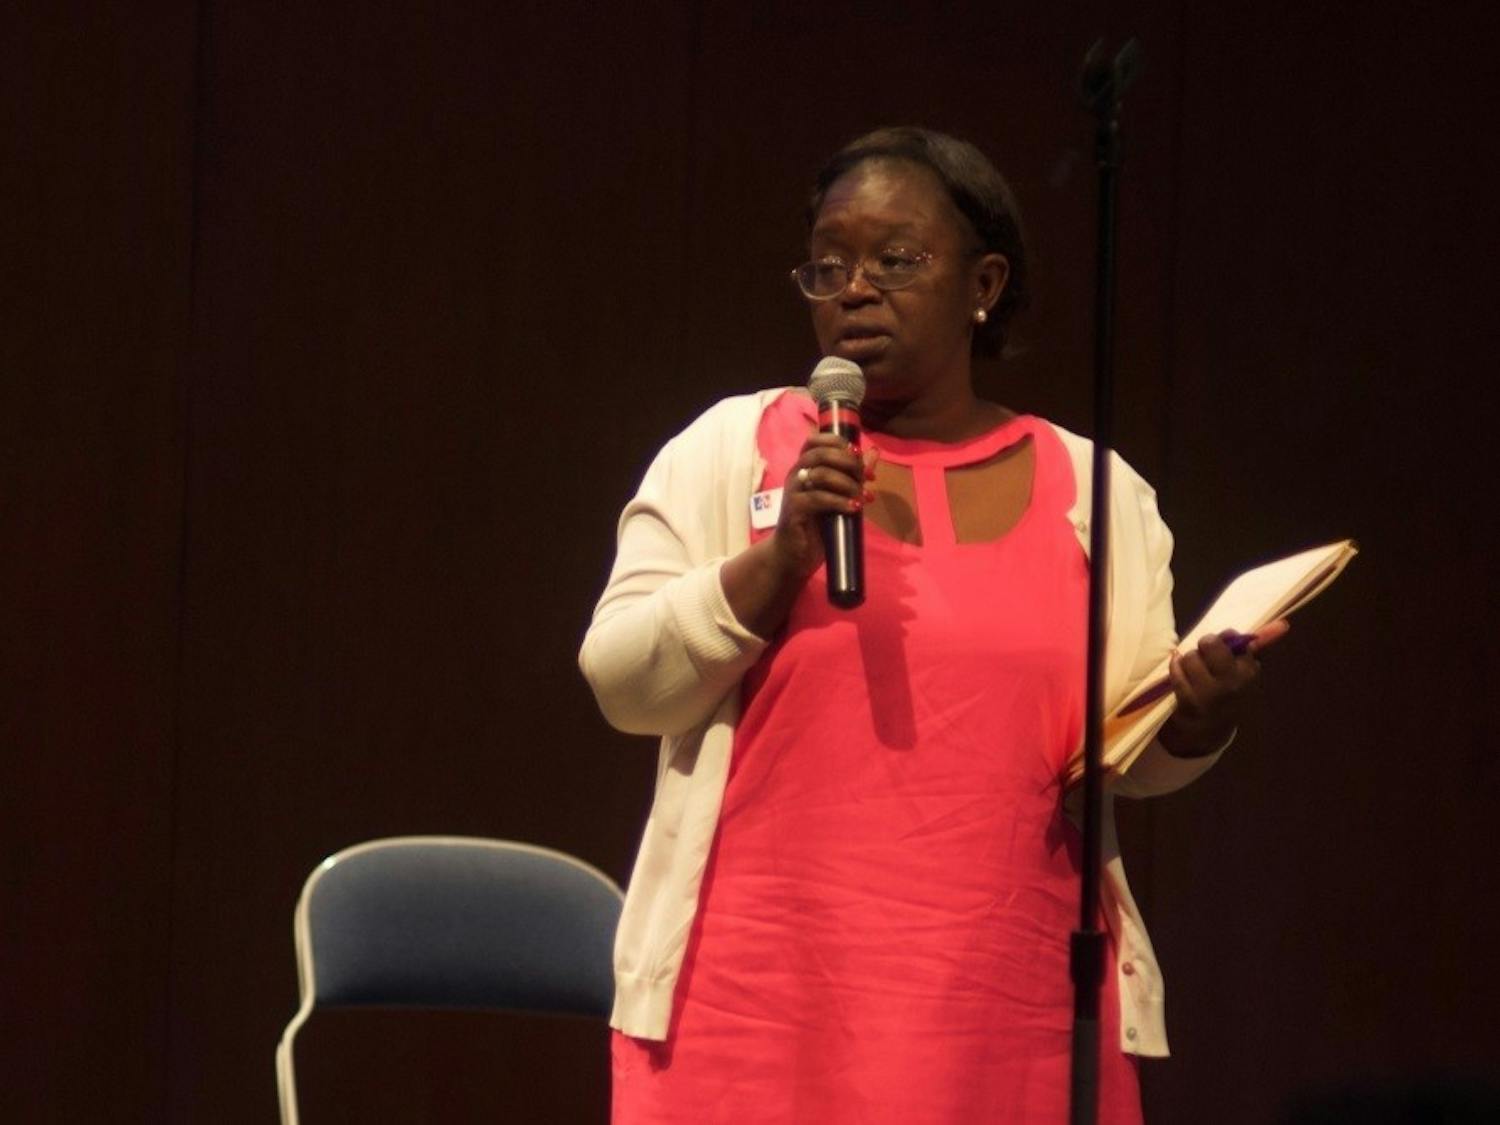 Interim Vice President of Campus Life Fanta Aw speaks at a University town hall on May 2, 2017 about the May 1 hate crime.